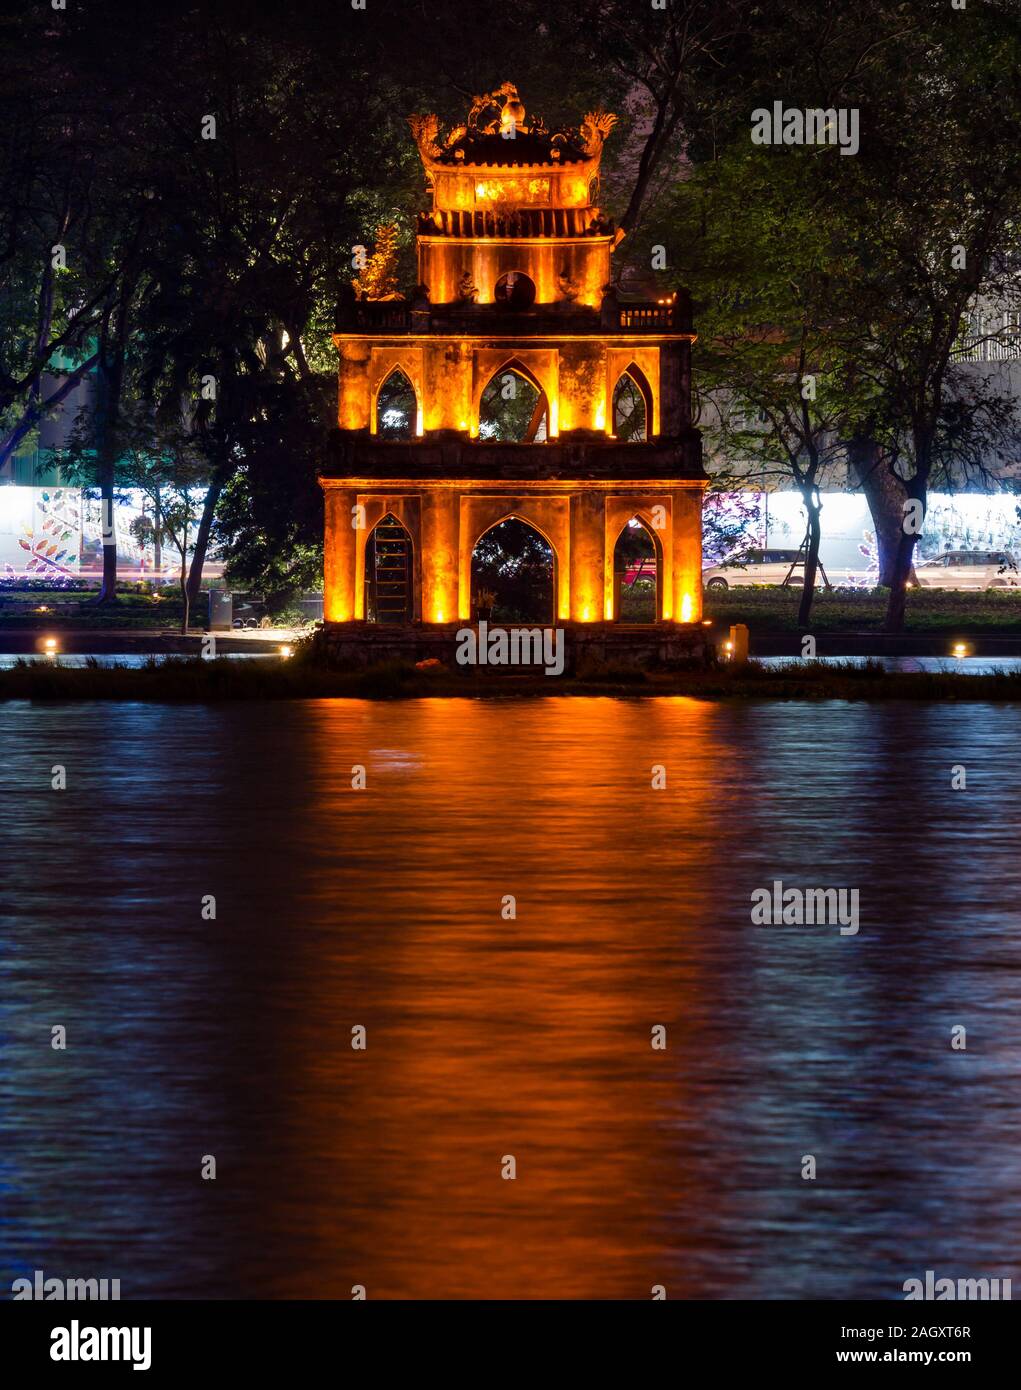 Turtle Tower or Thap Rua lit up at night with reflections in Hoan Kiem Lake, Hanoi, Vietnam, Asia Stock Photo